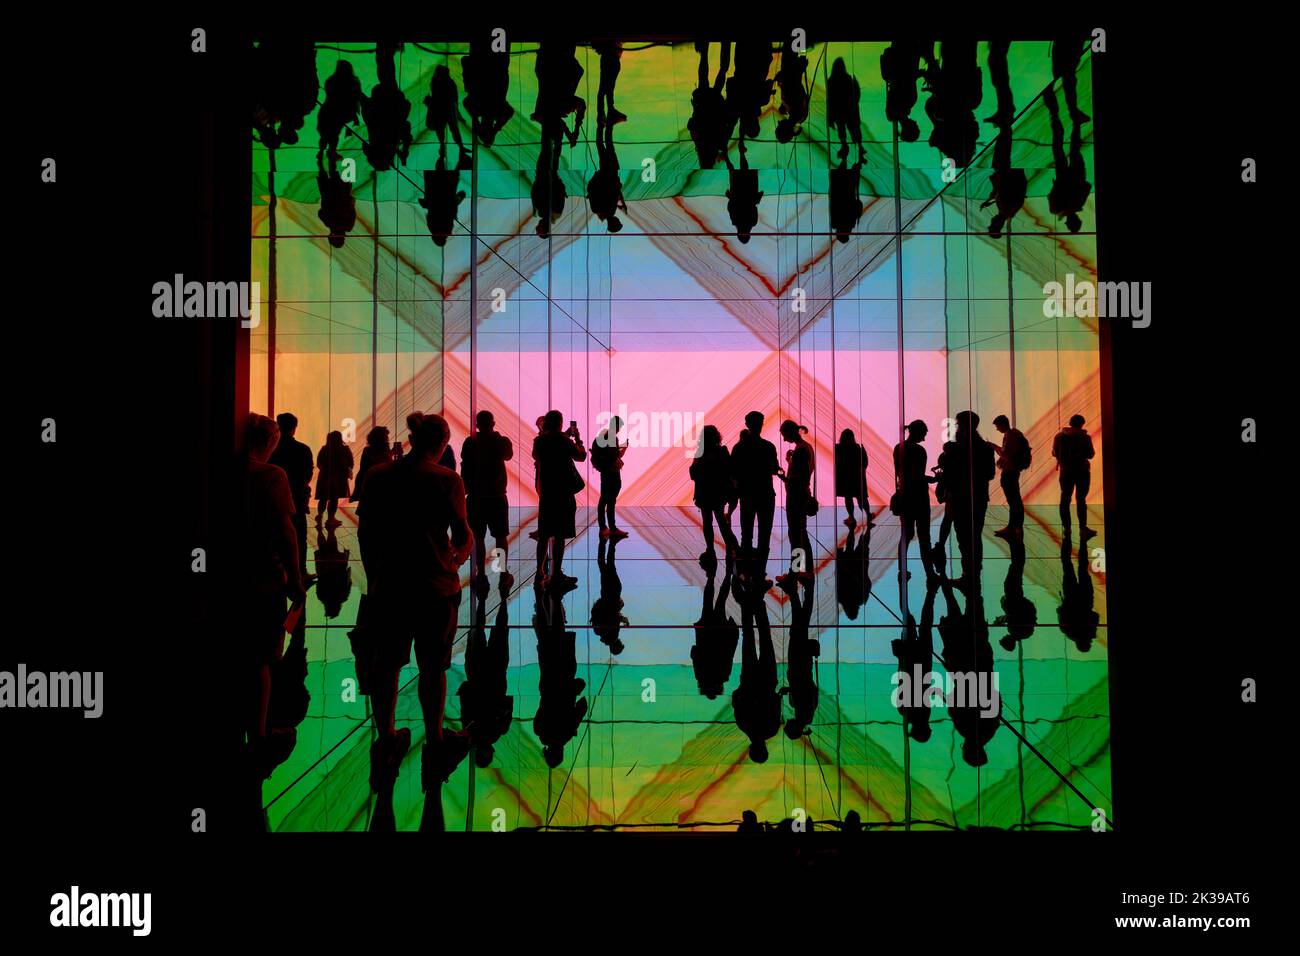 London, UK. 25th September, 2022. INTO SIGHT. The large-scale installation by Sony Design sees audience behaviour influence the visuals and soundscape. It combines Sony's Crystal LED display systems with generative sound, see-through glass walls and mirrors. The work is on show as part of the 20th London Design Festival 2022. Credit: Guy Corbishley/Alamy Live News Stock Photo